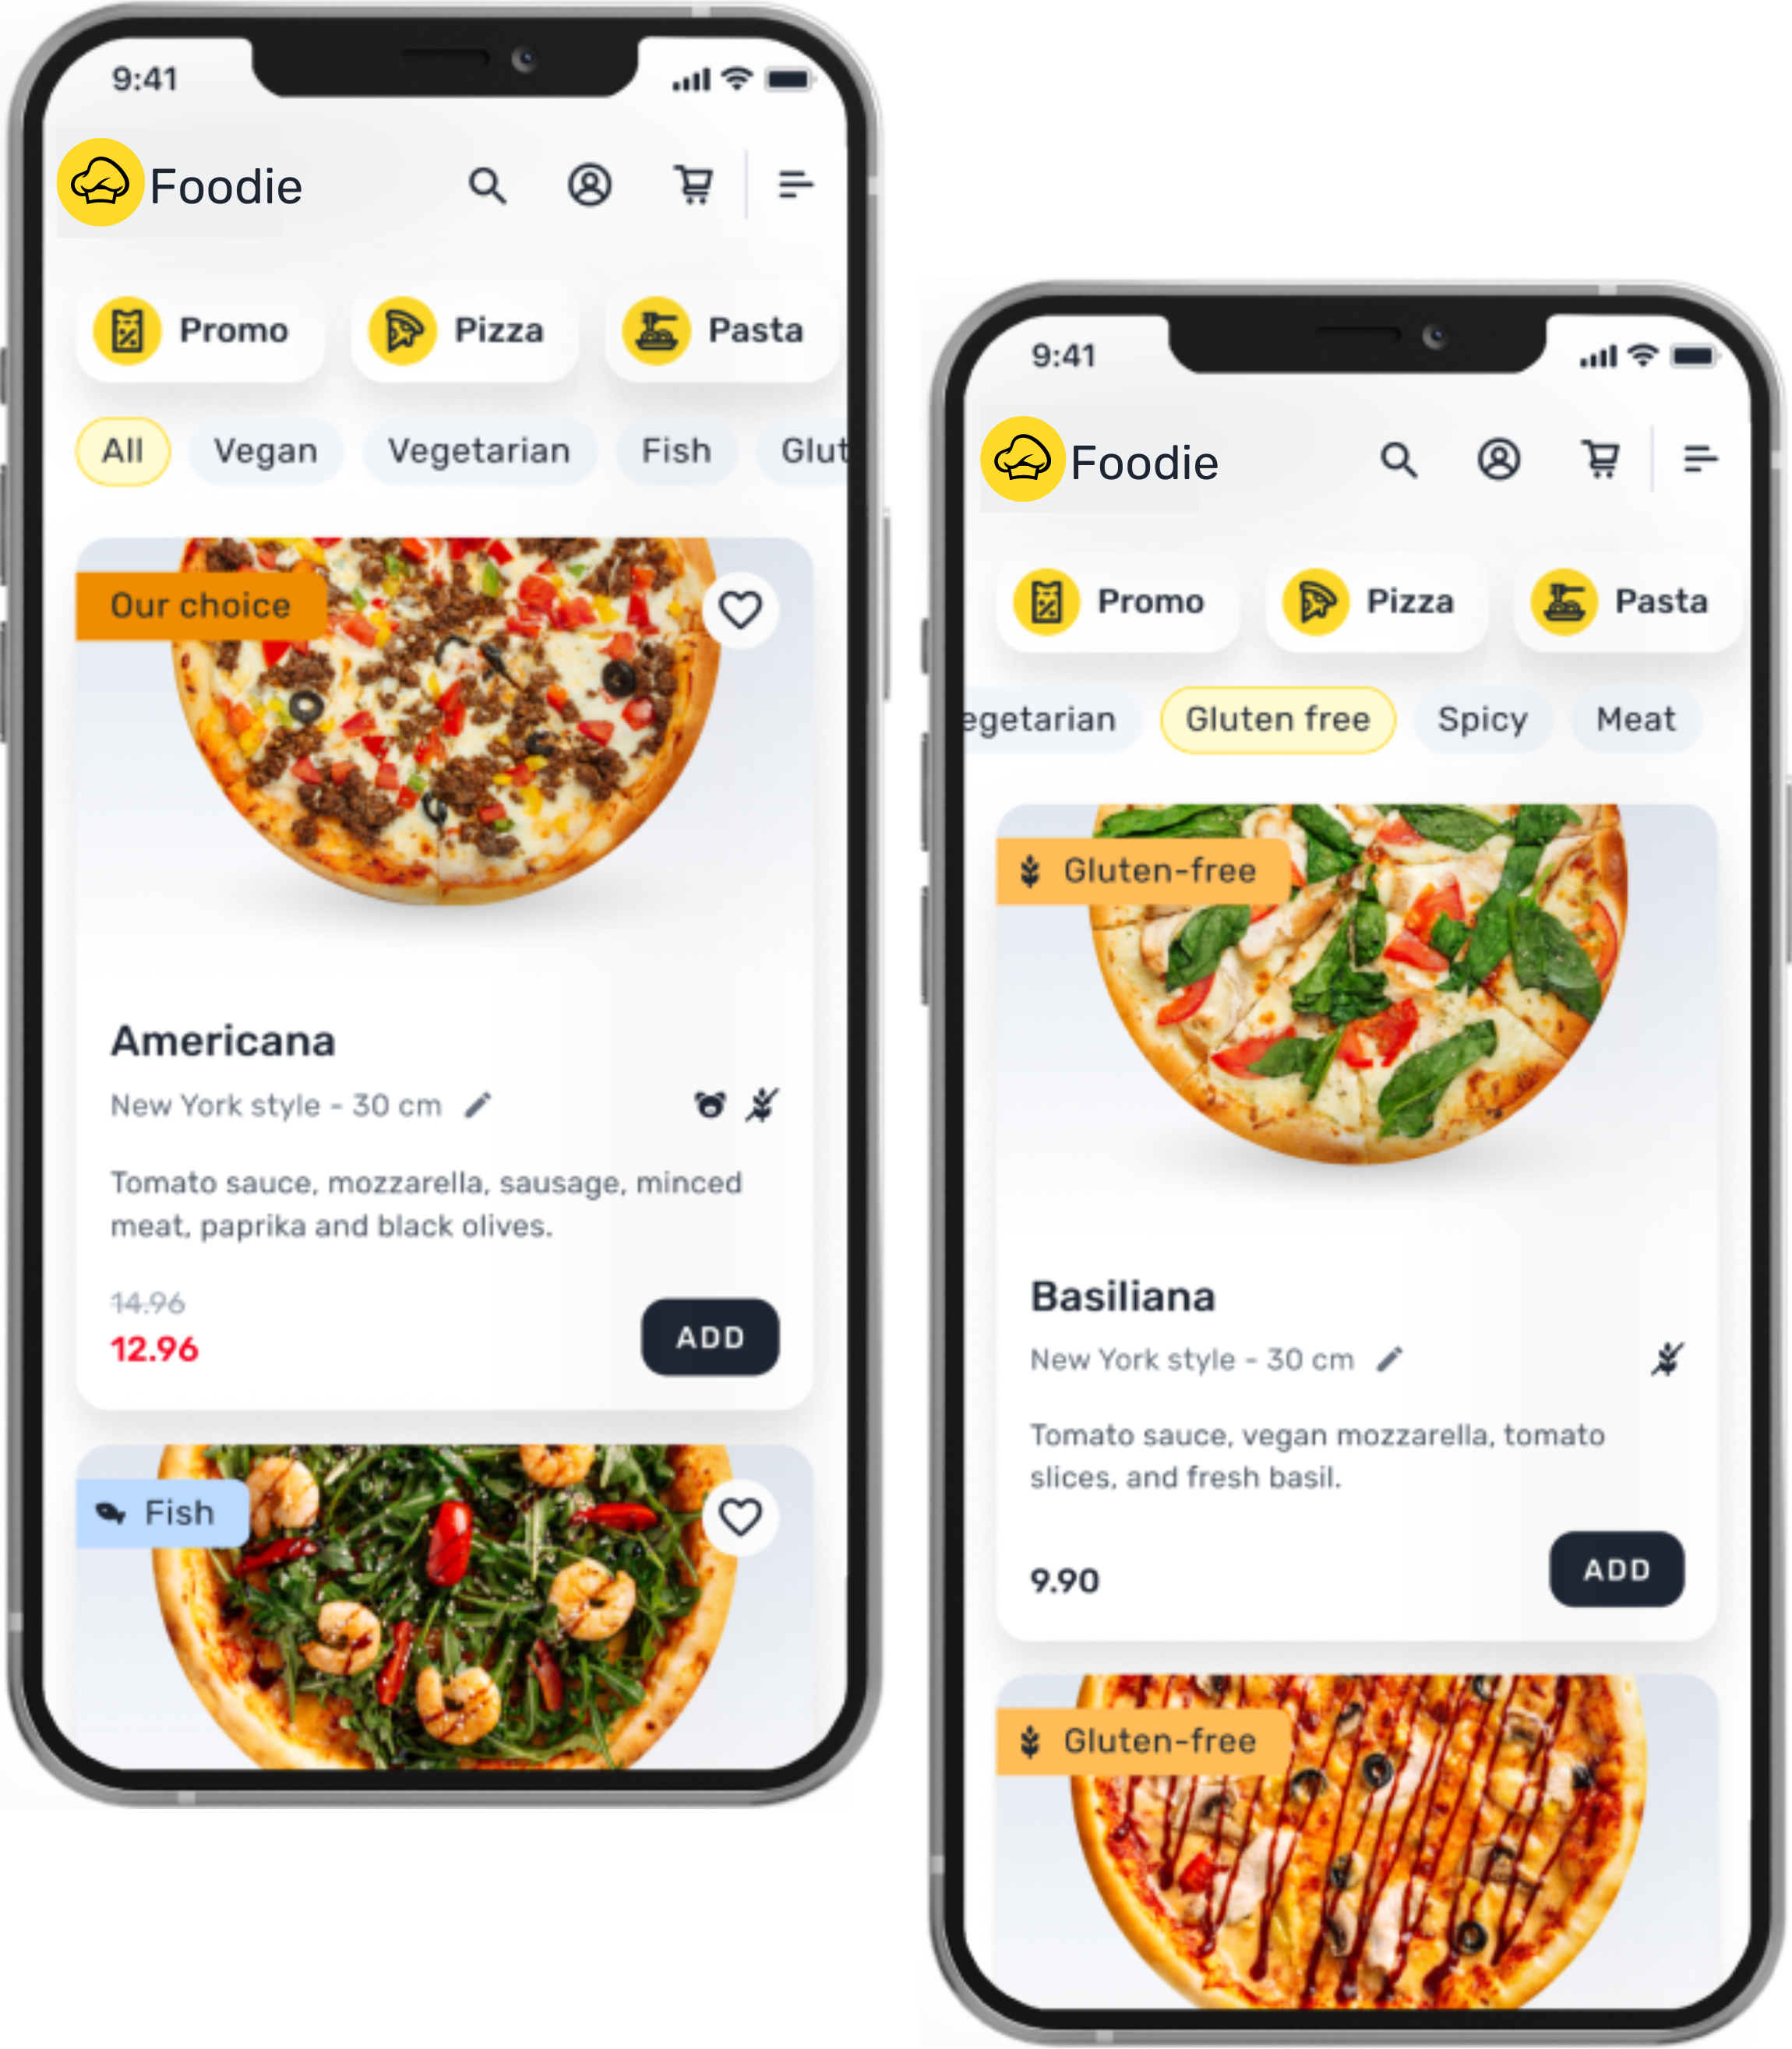 Two screenshots of pizzas displayed on a product landing page, inviting visitors to explore menu options and make a purchase decision